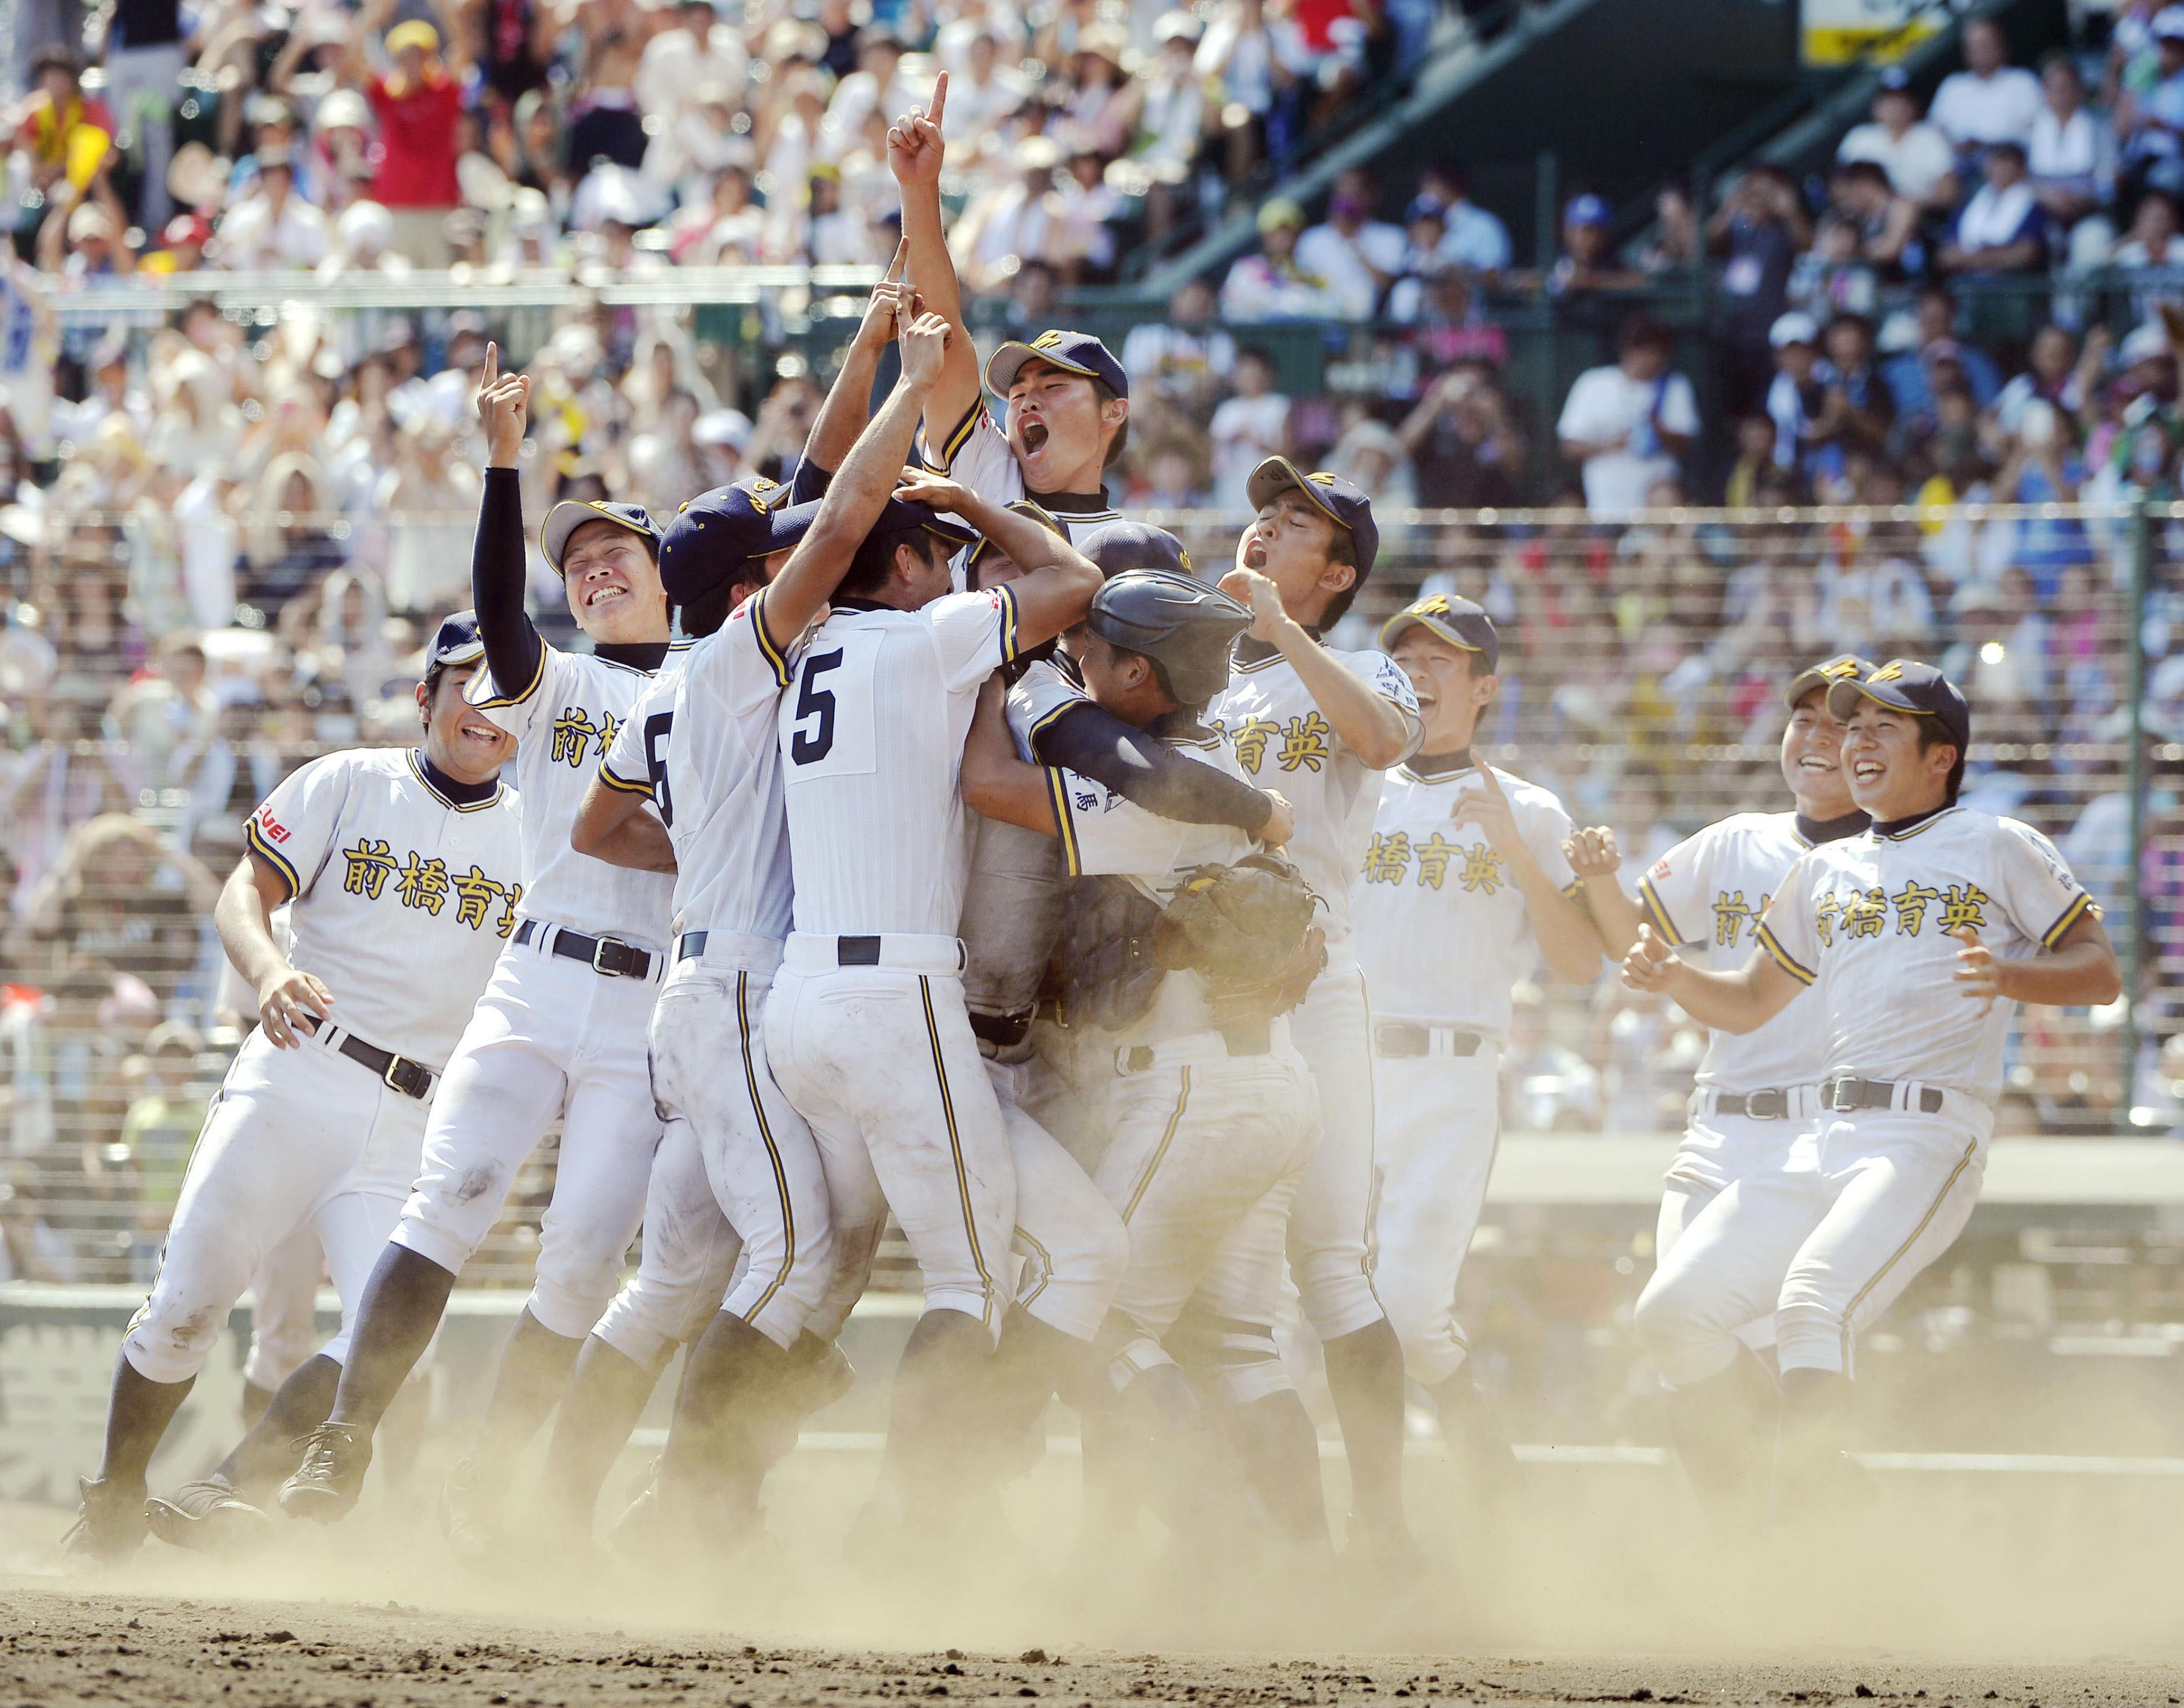 Boys of last summer: Players from Maebashi Ikuei High School in Gunma Prefecture celebrate winning the 95th National High School Baseball Championship, aka the Summer Koshien, for the first time last August at Koshien Stadium in Nishinomiya, Hyogo Prefecture. A similar competition &#8212; the National High School Baseball Invitational Tournament, or Spring Koshien &#8212; is held earlier in the year. | KYODO